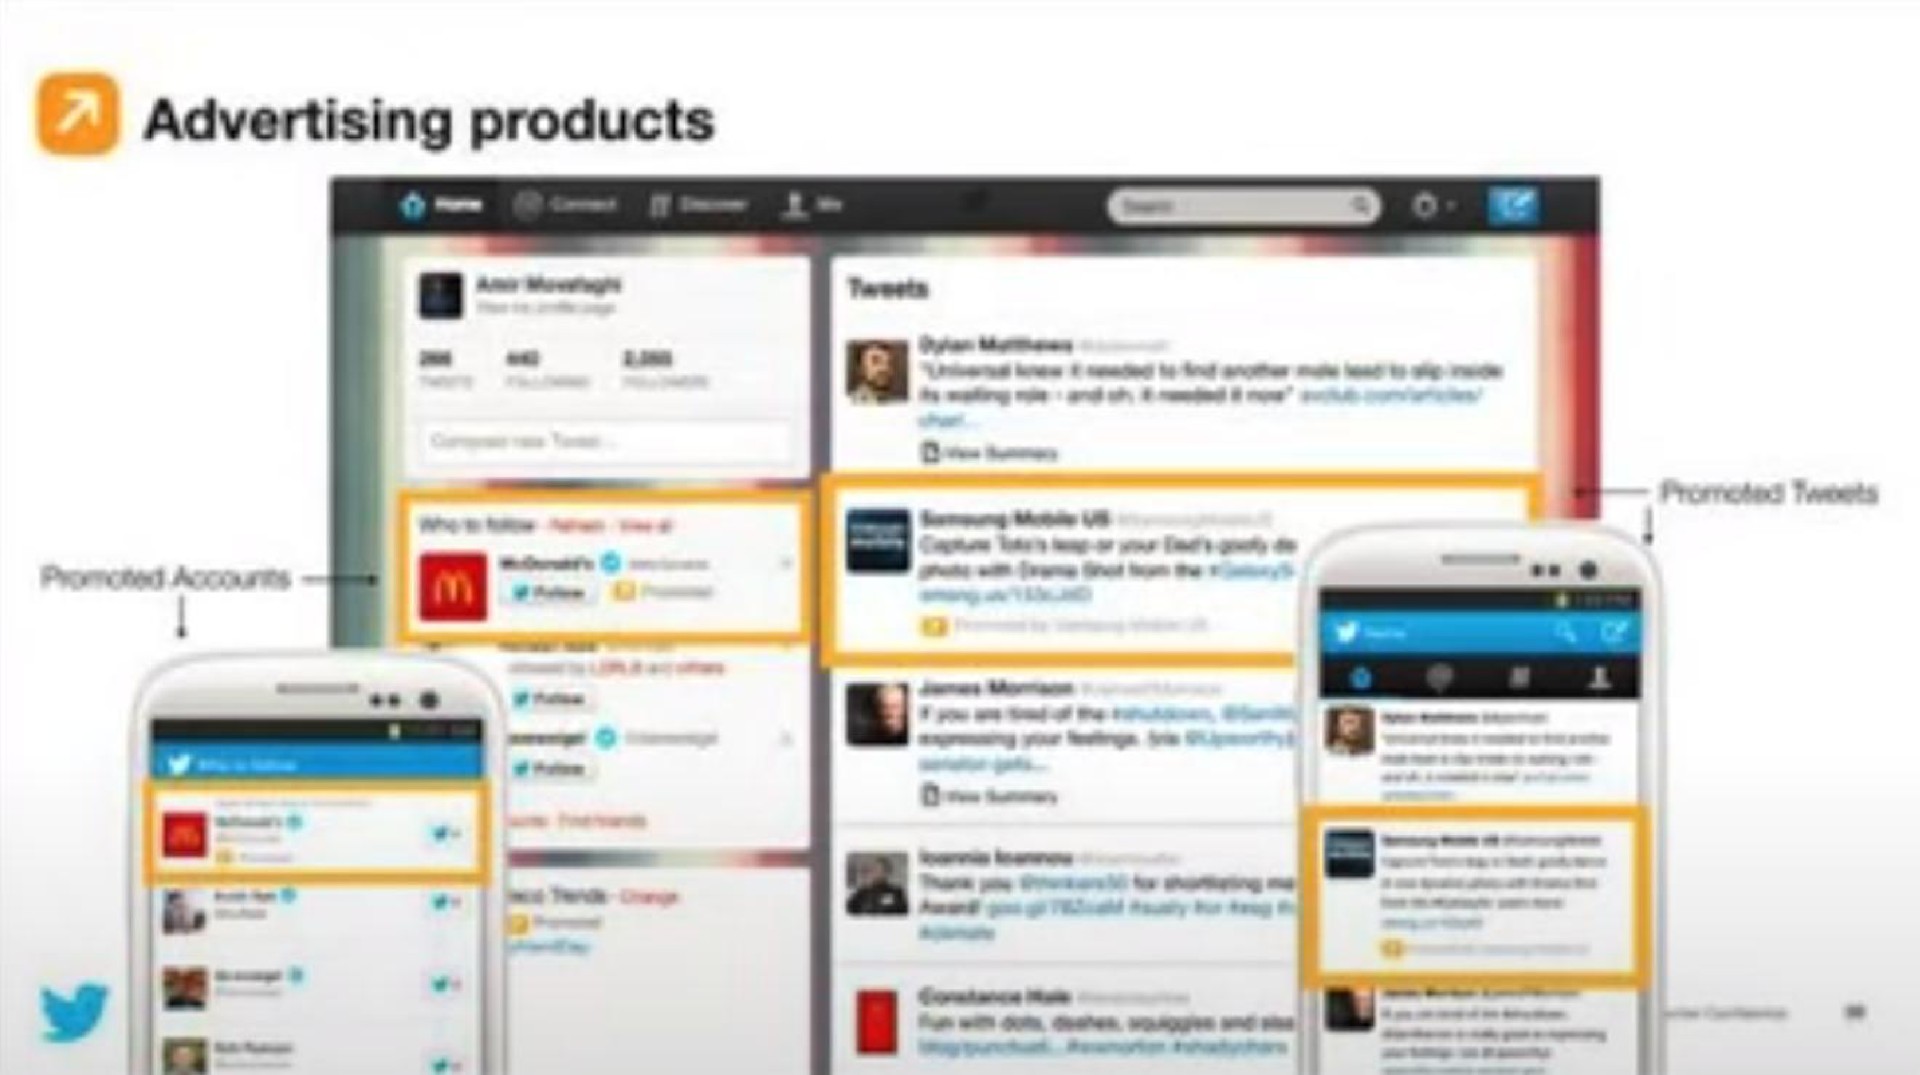 advertising products | Twitter